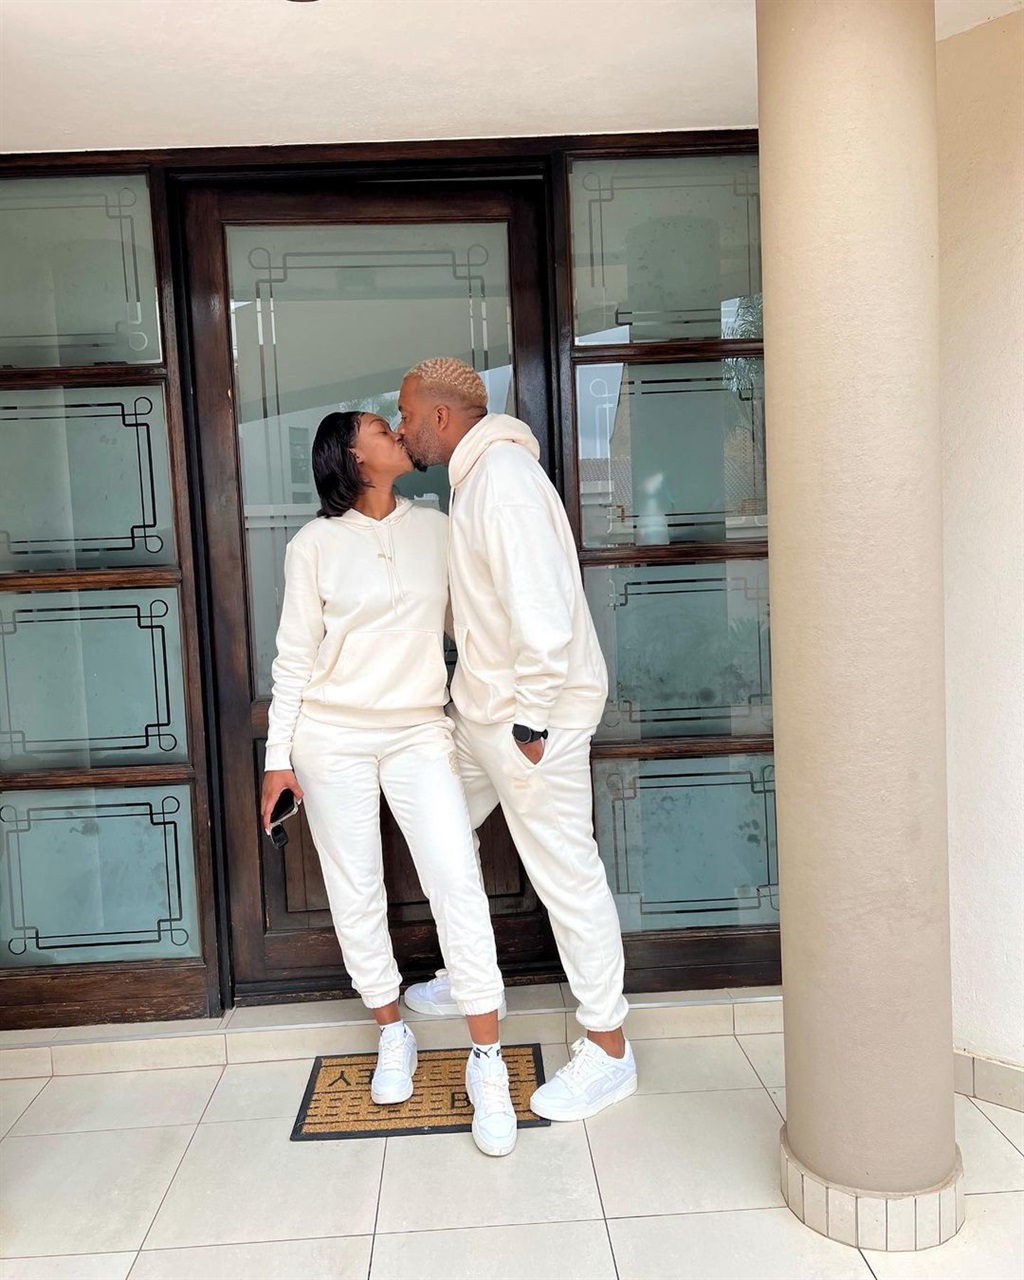 Itumeleng Khune matching outfits with his wife Sph